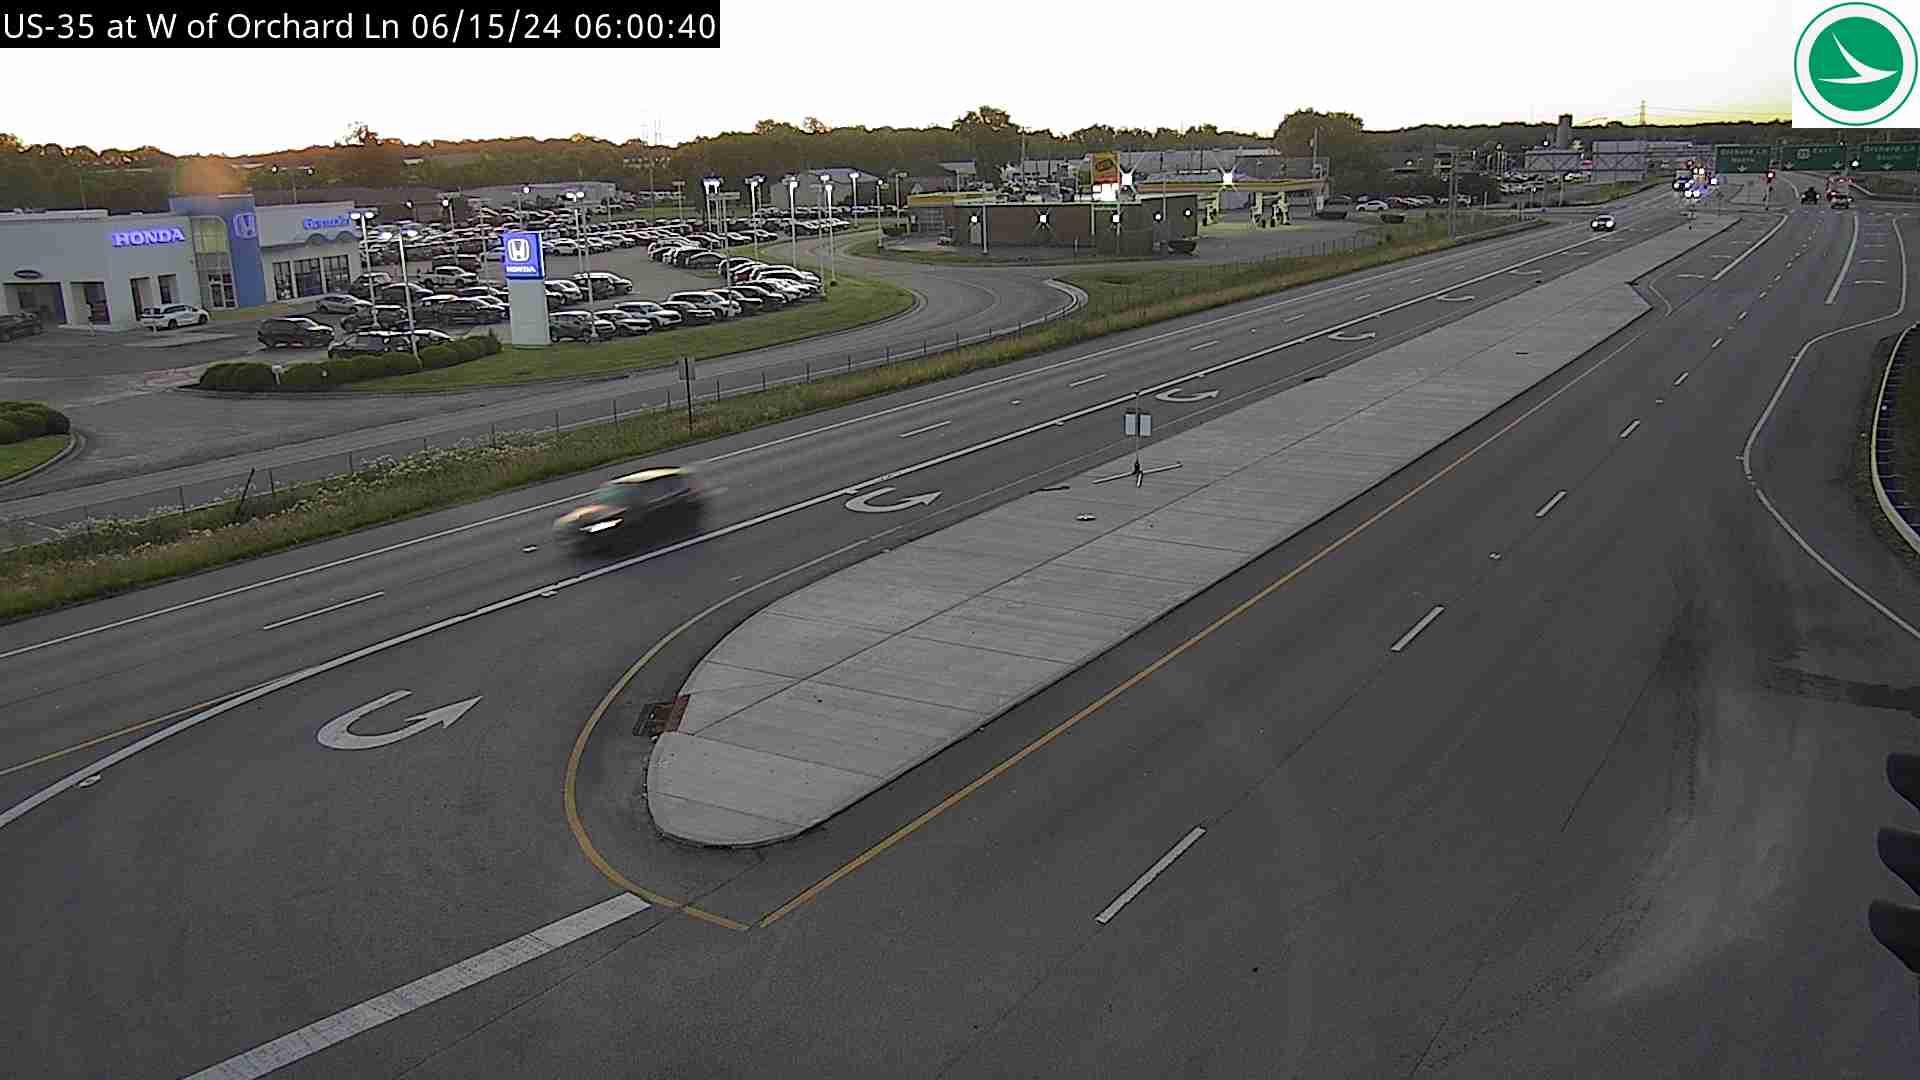 Traffic Cam Alpha: US-35 at West of Orchard Ln Player